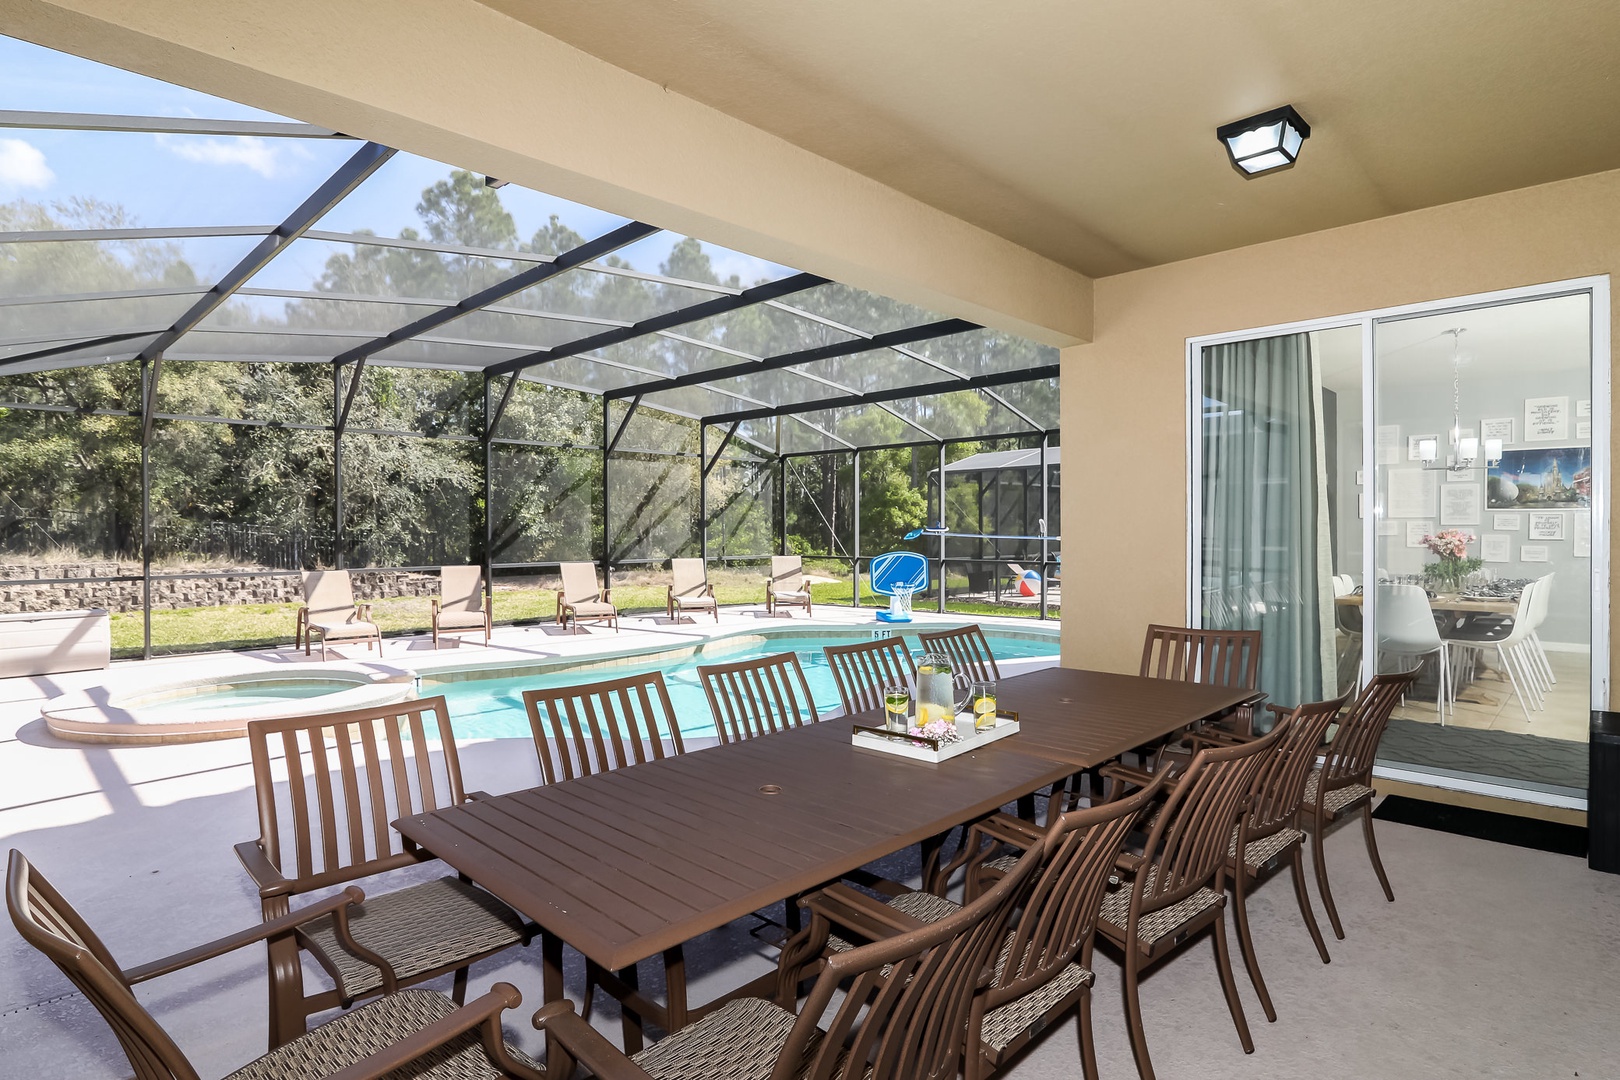 Screened pool with outdoor dining table